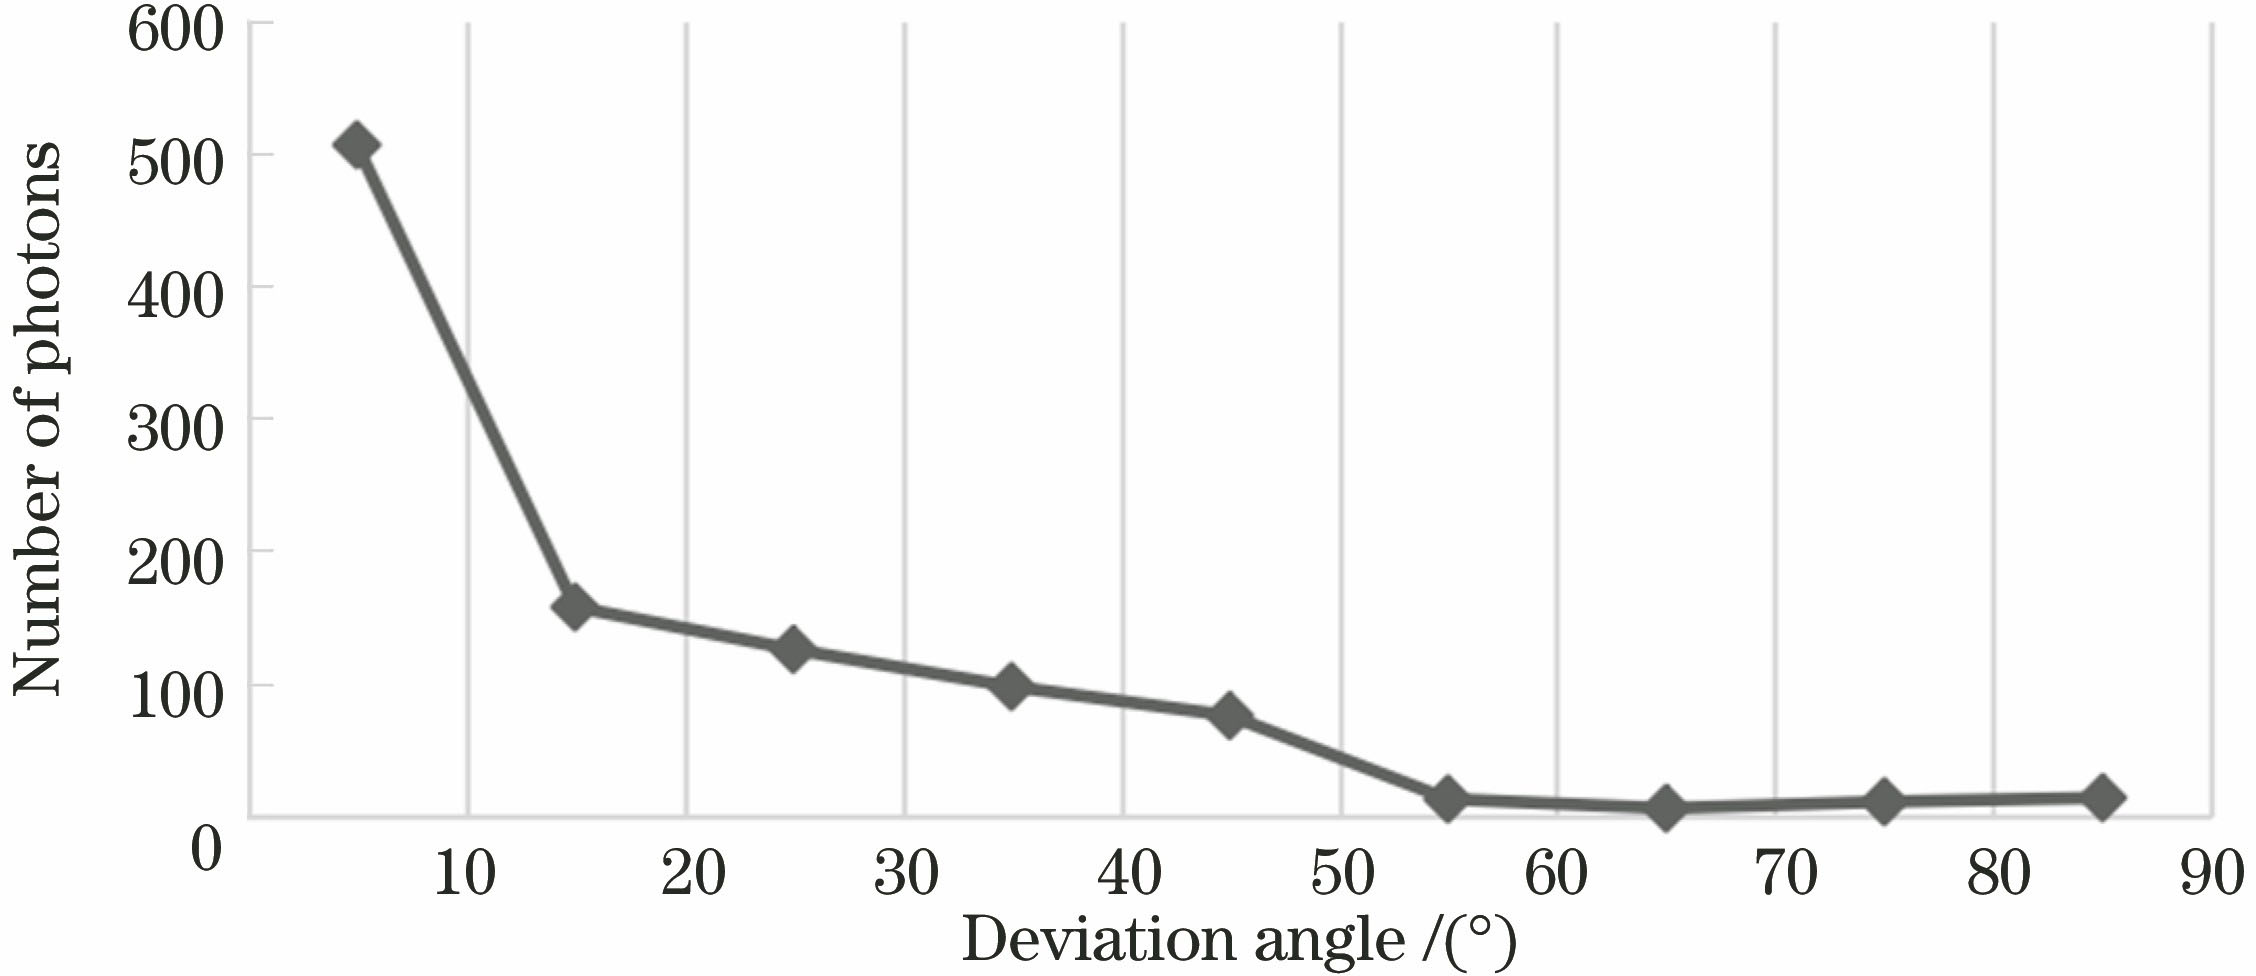 Distribution diagram of deviation angle of signal pulse without compensation